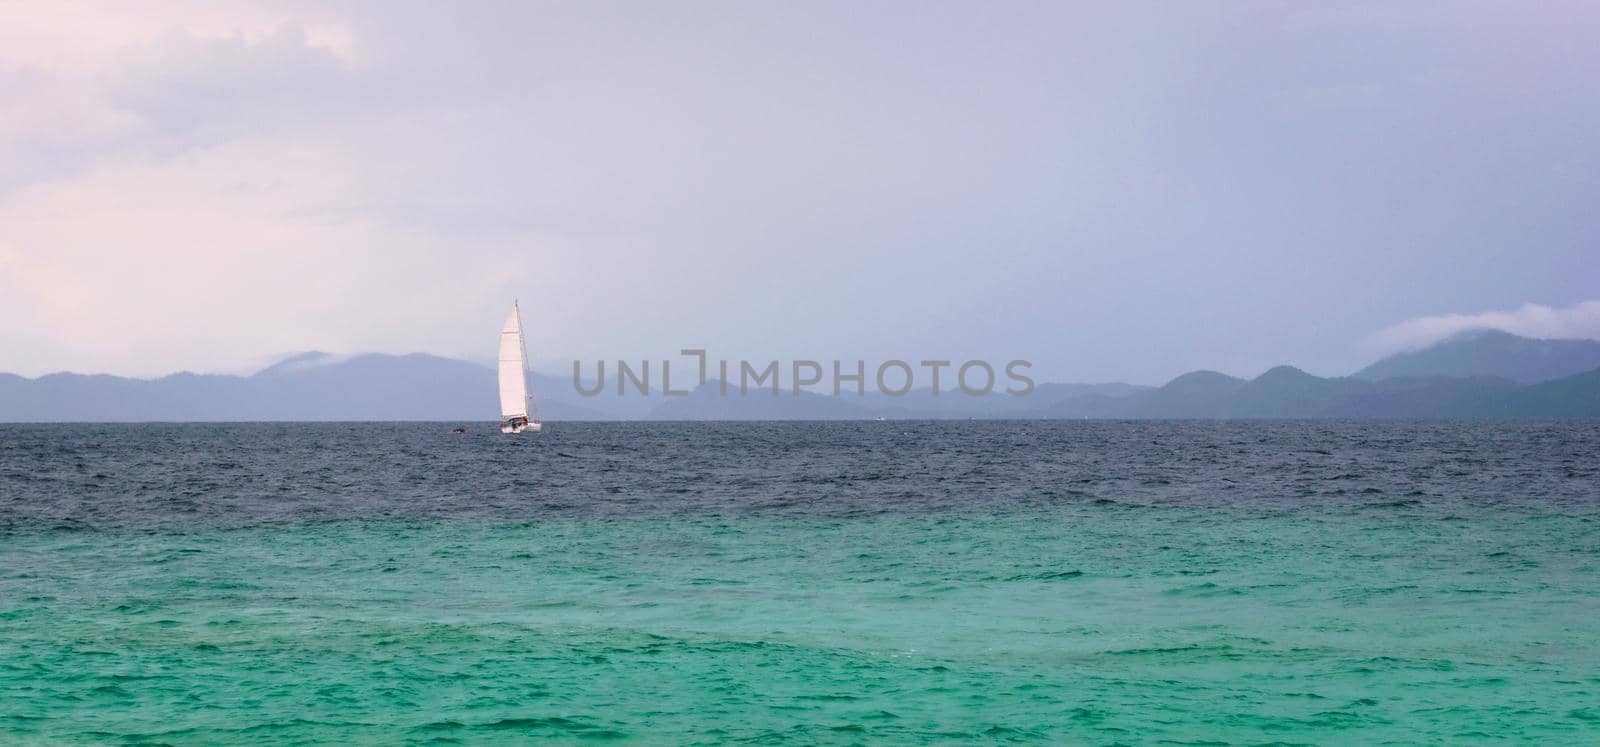 Sailboat on the turquoise waters of Andaman Sea, near Phuket, Thailand. by hernan_hyper